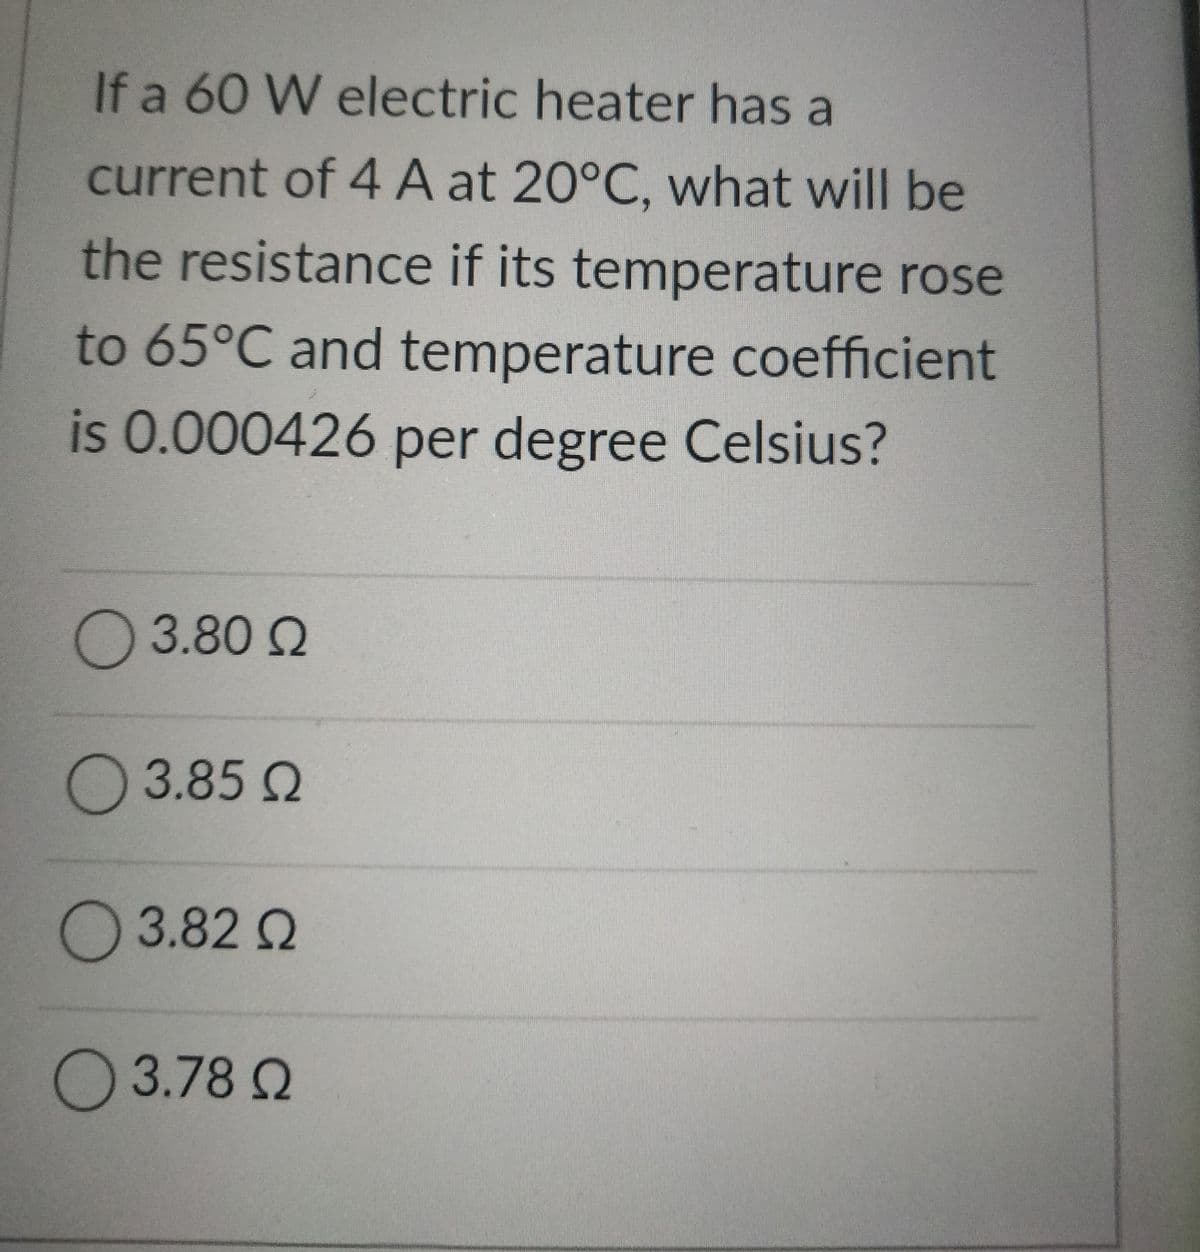 If a 60 W electric heater has a
current of 4 A at 20°C, what will be
the resistance if its temperature rose
to 65°C and temperature coefficient
is 0.000426 per degree Celsius?
Ο 3.80 Ω
Ο 3.85 Ω
3.82 Q
Ο 3.78 Ω